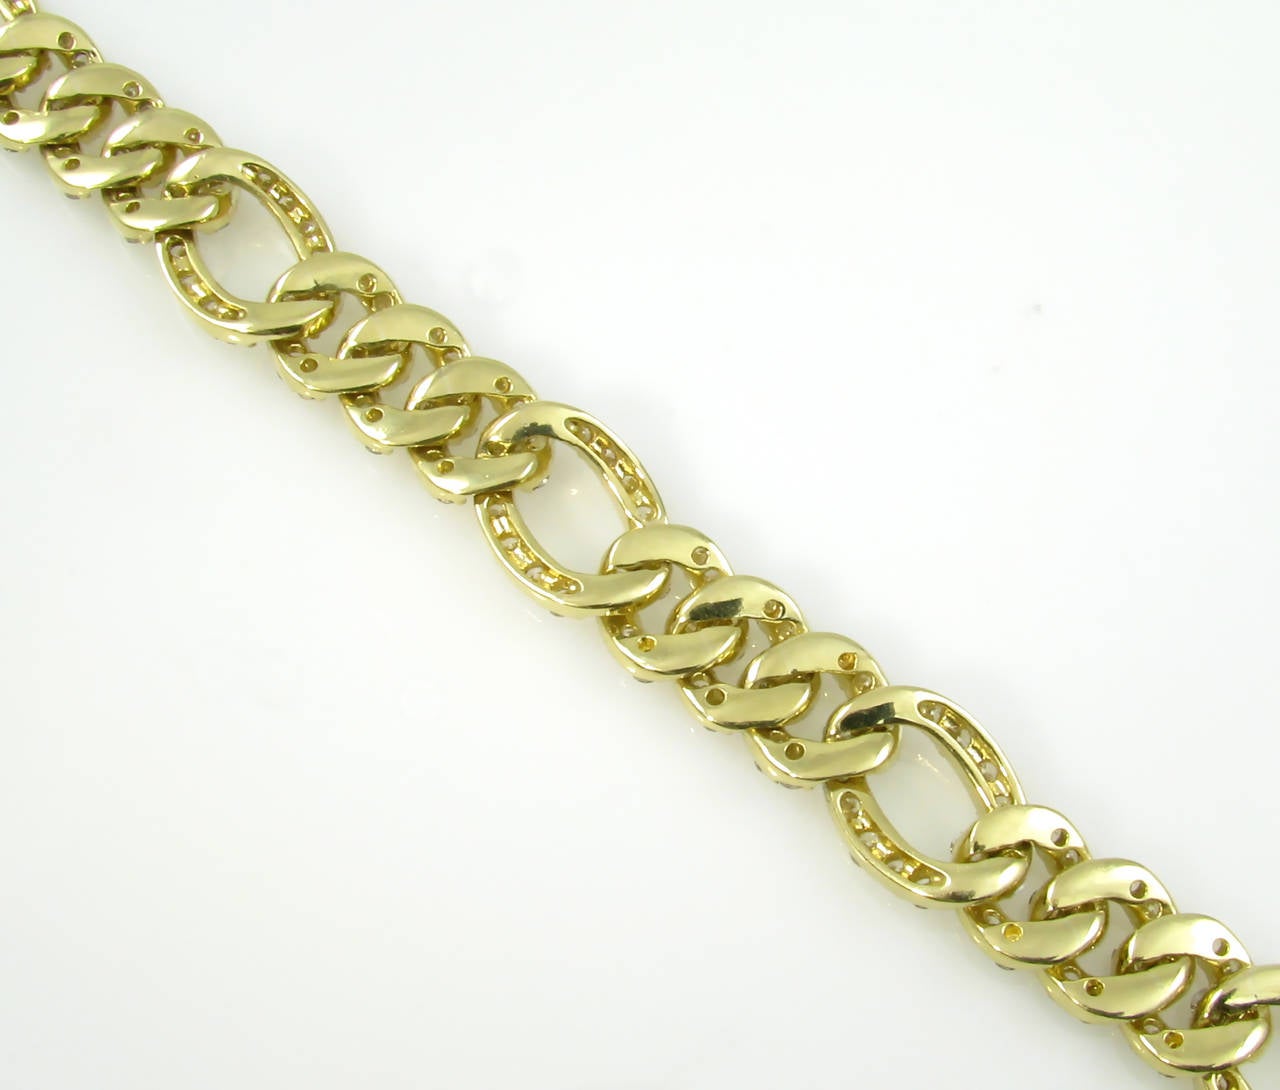 An 18 karat yellow gold and diamond flexible link bracelet, Circa 1980s.  The bracelet is designed as a larger oval link alternating with 3 smaller links.  Each link is prong set with round brilliant cut diamonds.  The bracelet contains a total of